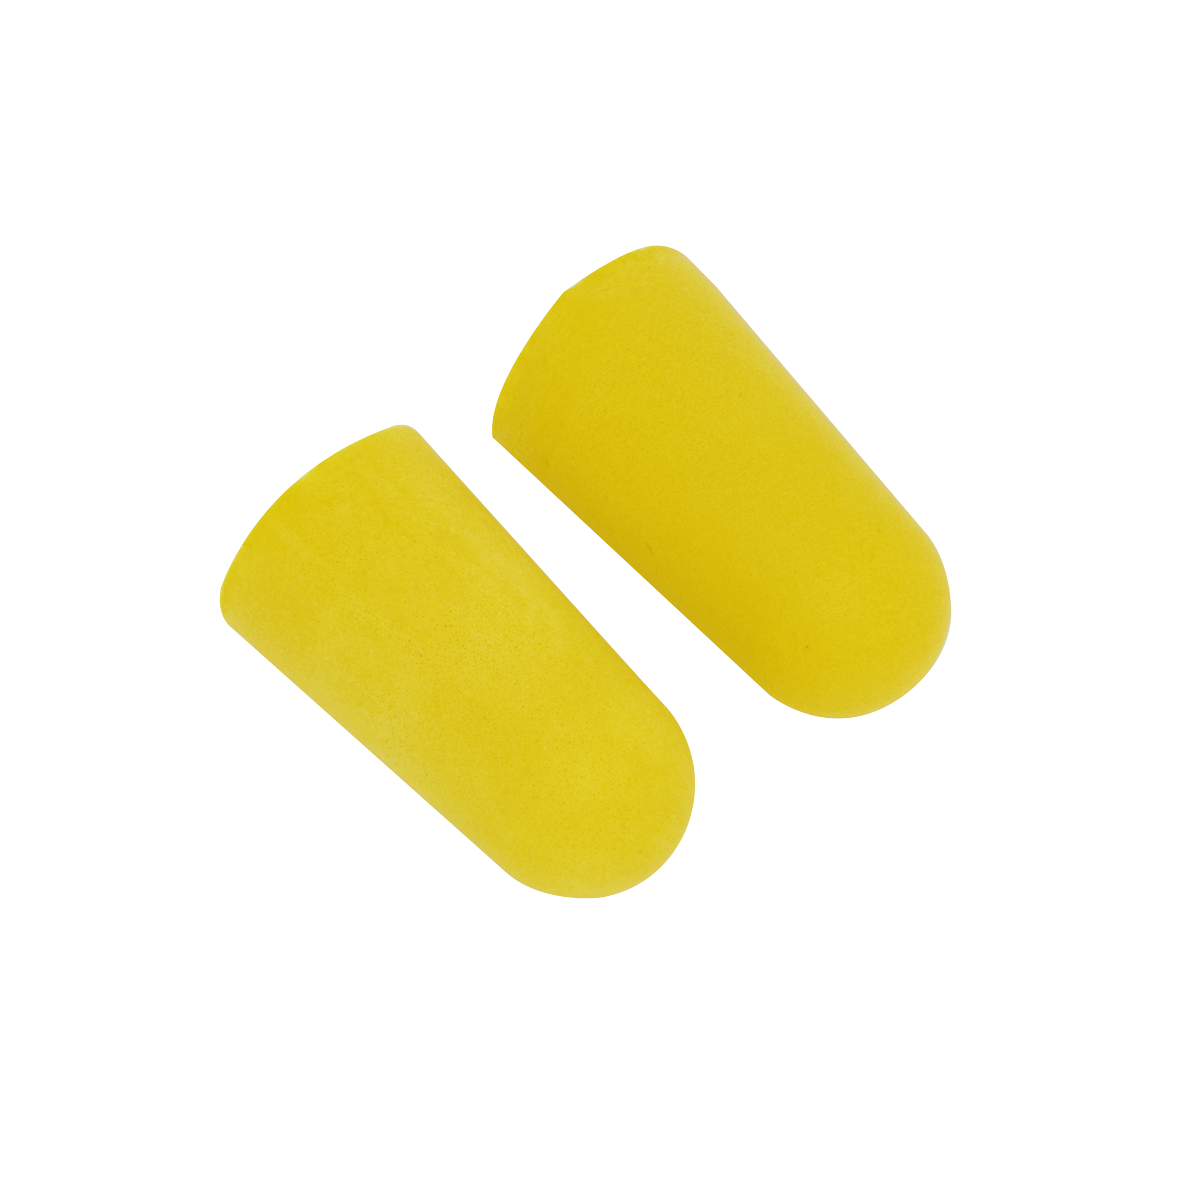 Sealey Disposable Ear Plugs Dispenser Refill - 500 Pairs 403/500DRE